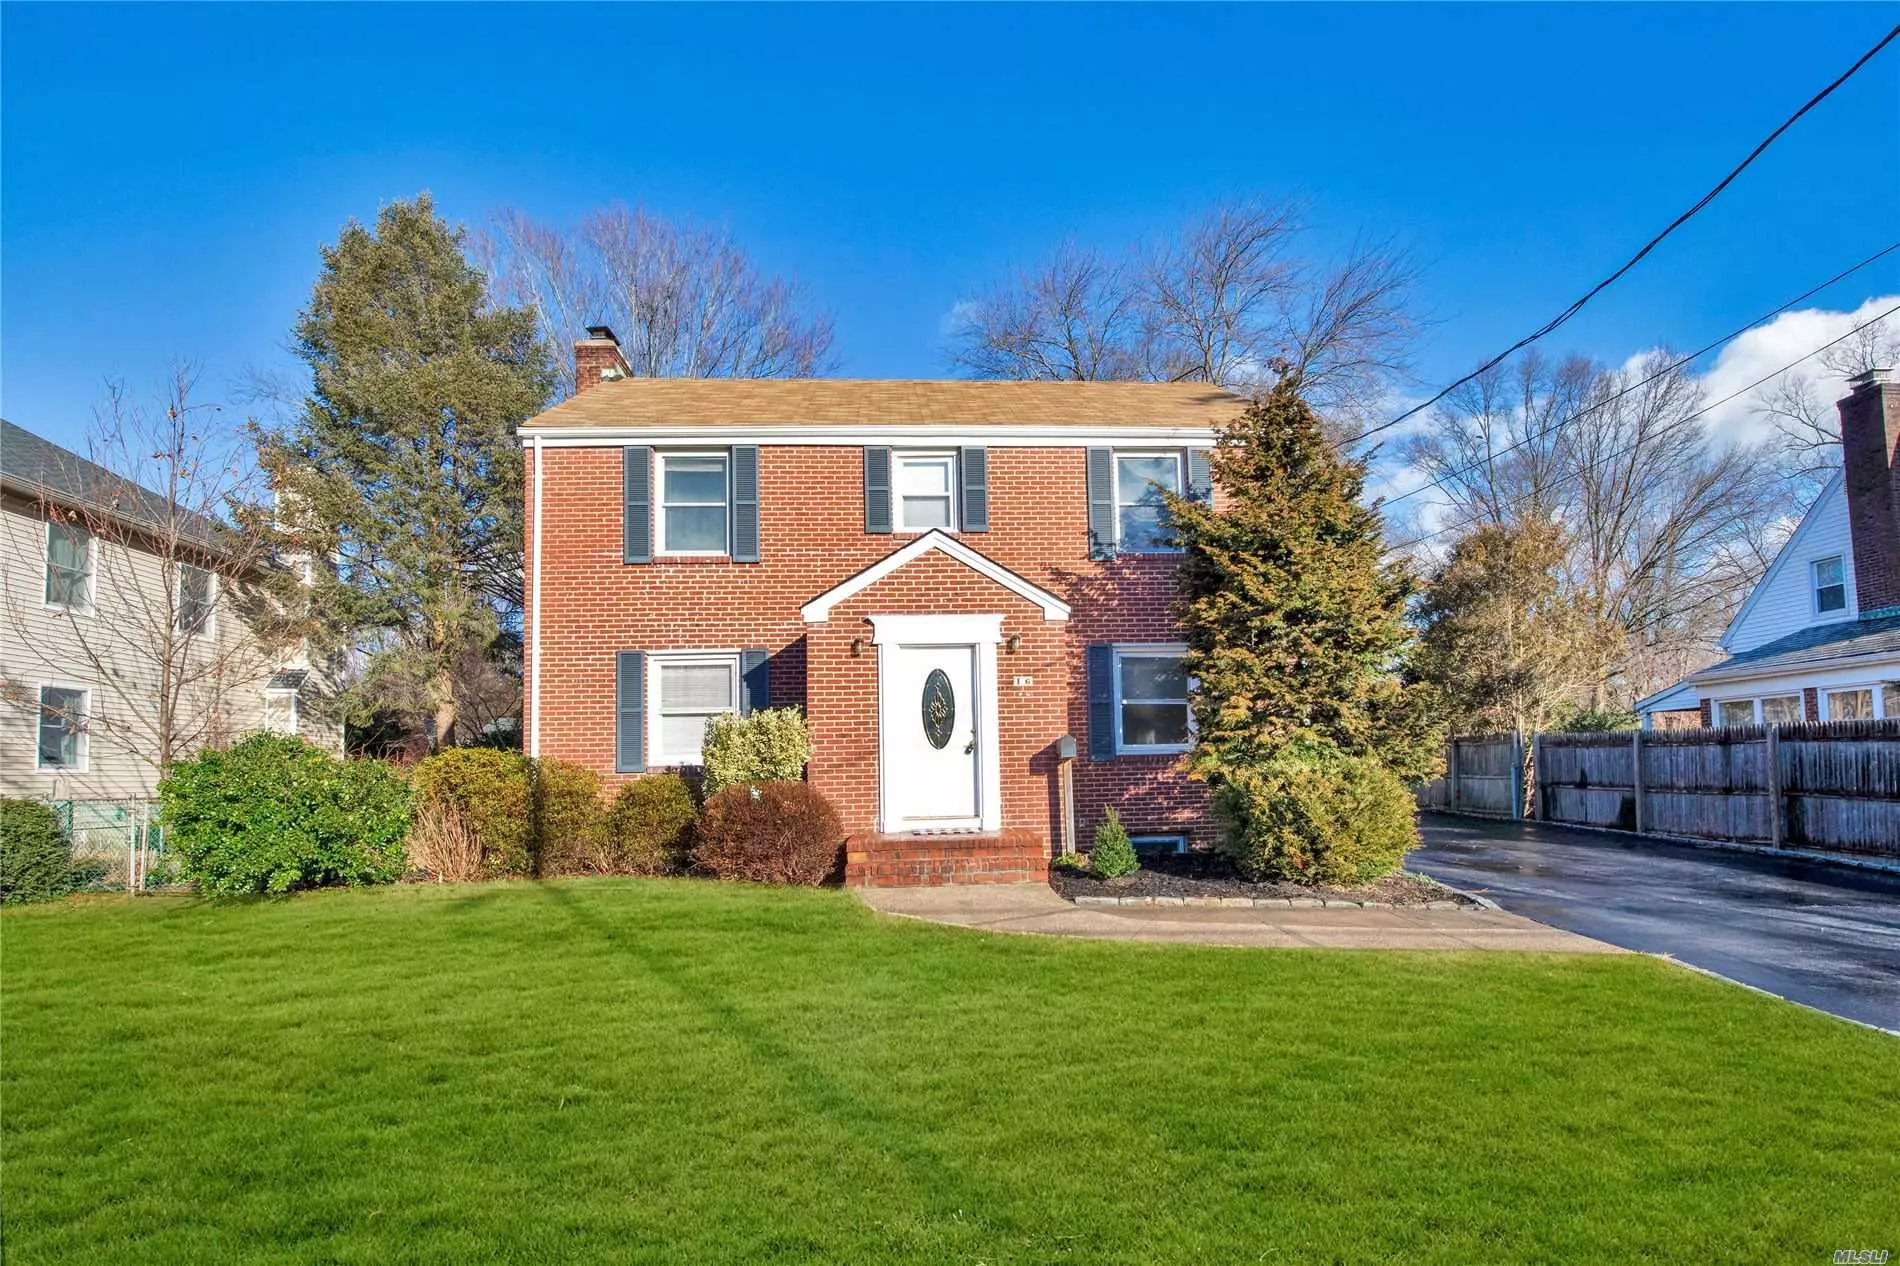 Nicely Updated Spacious All Brick Colonial. All New Heating, Baths and Kitchen w/SS Appliances. Hardwood Floors Throughout. Hi Hats. Lr w/Fireplace. Large Family Rm. Park-Like Grounds. In-Ground Pool Completely Fenced (kitchen window under repair. It&rsquo;s in back-order). Low Taxes